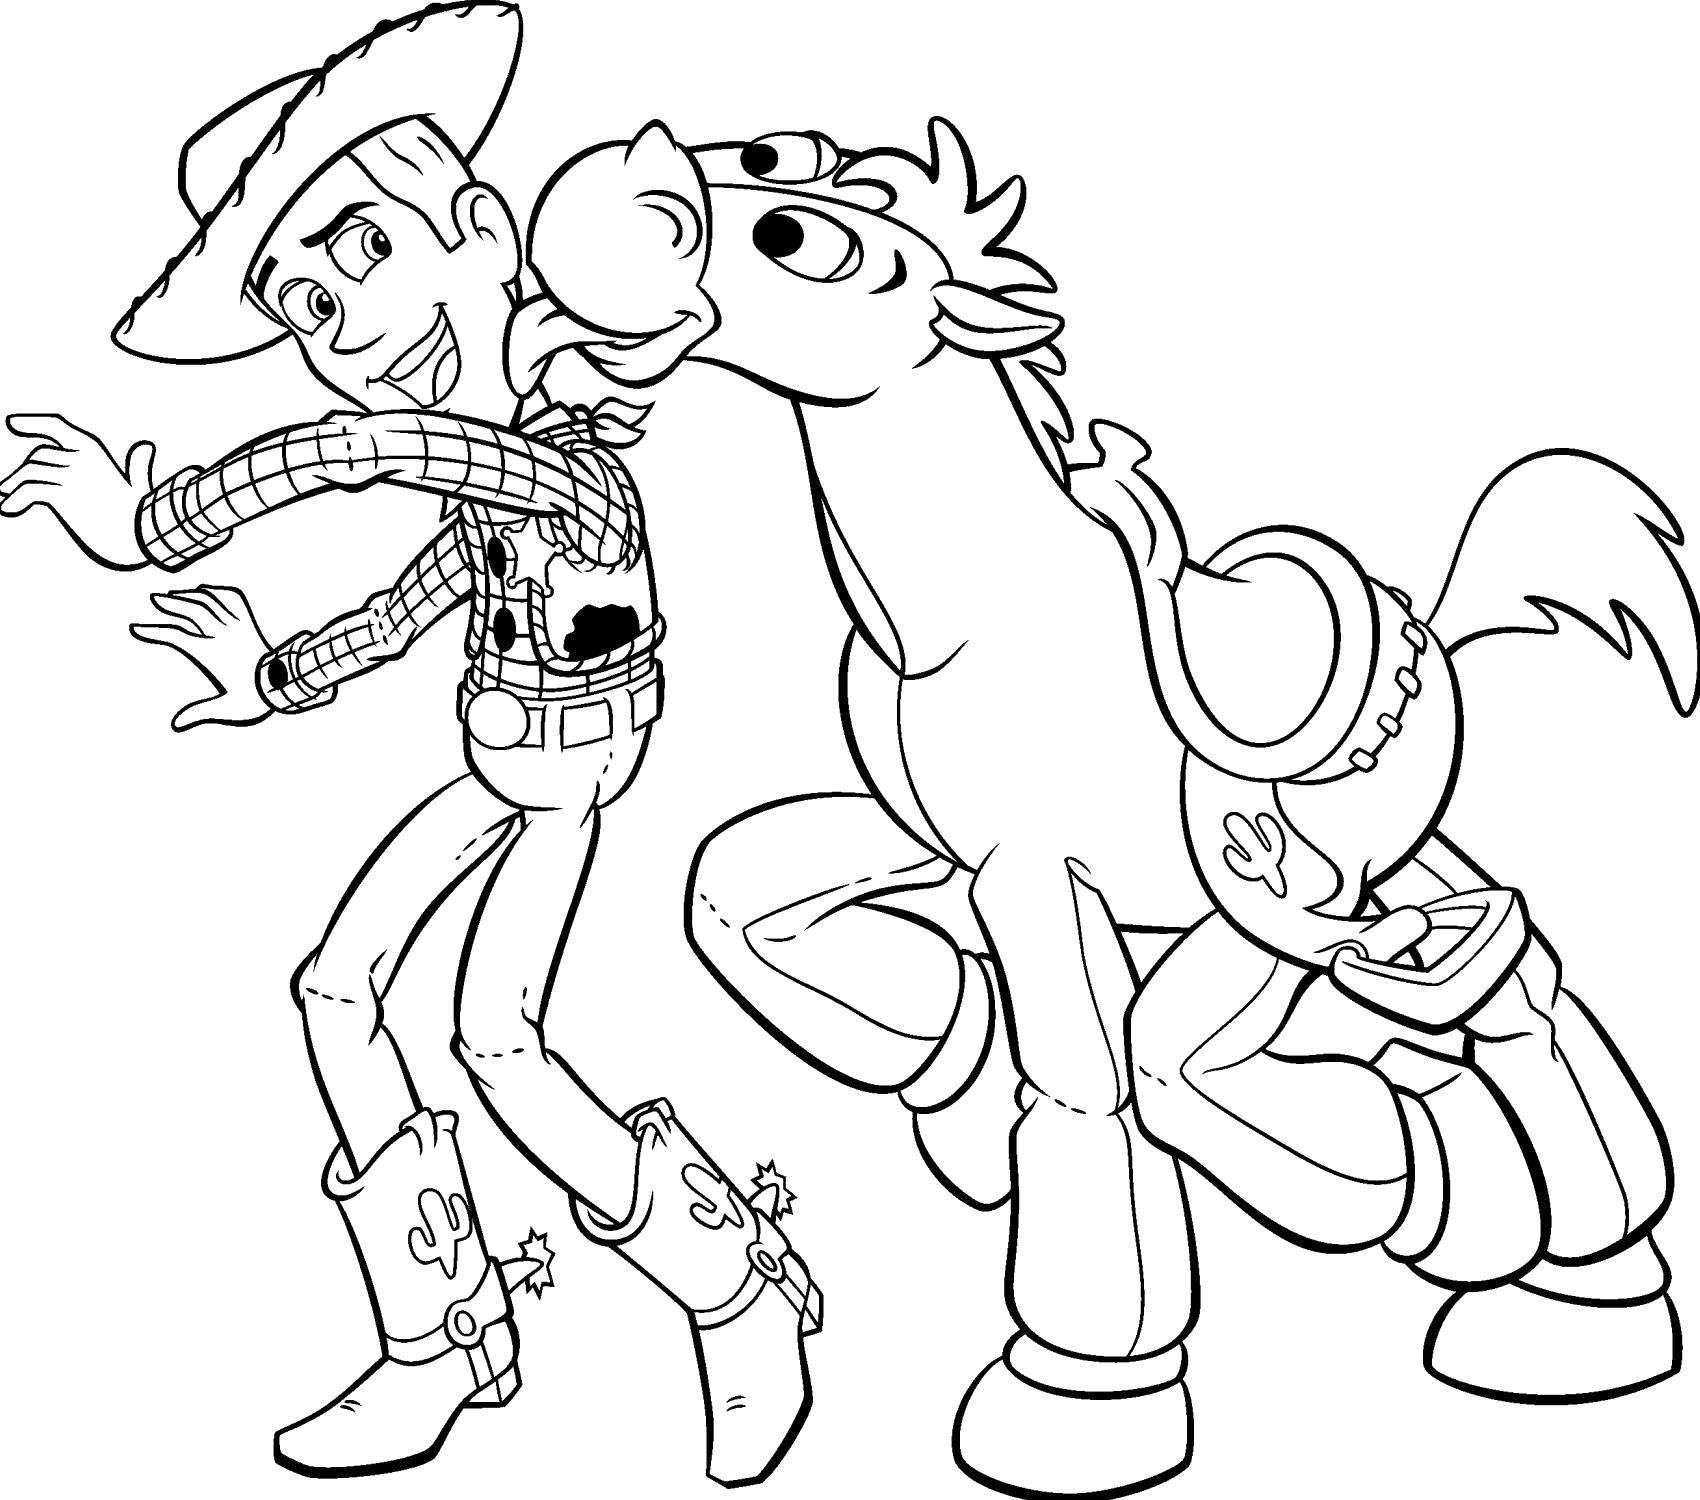 Coloring Woody with his horse. Category For boys . Tags:  Cartoon character.